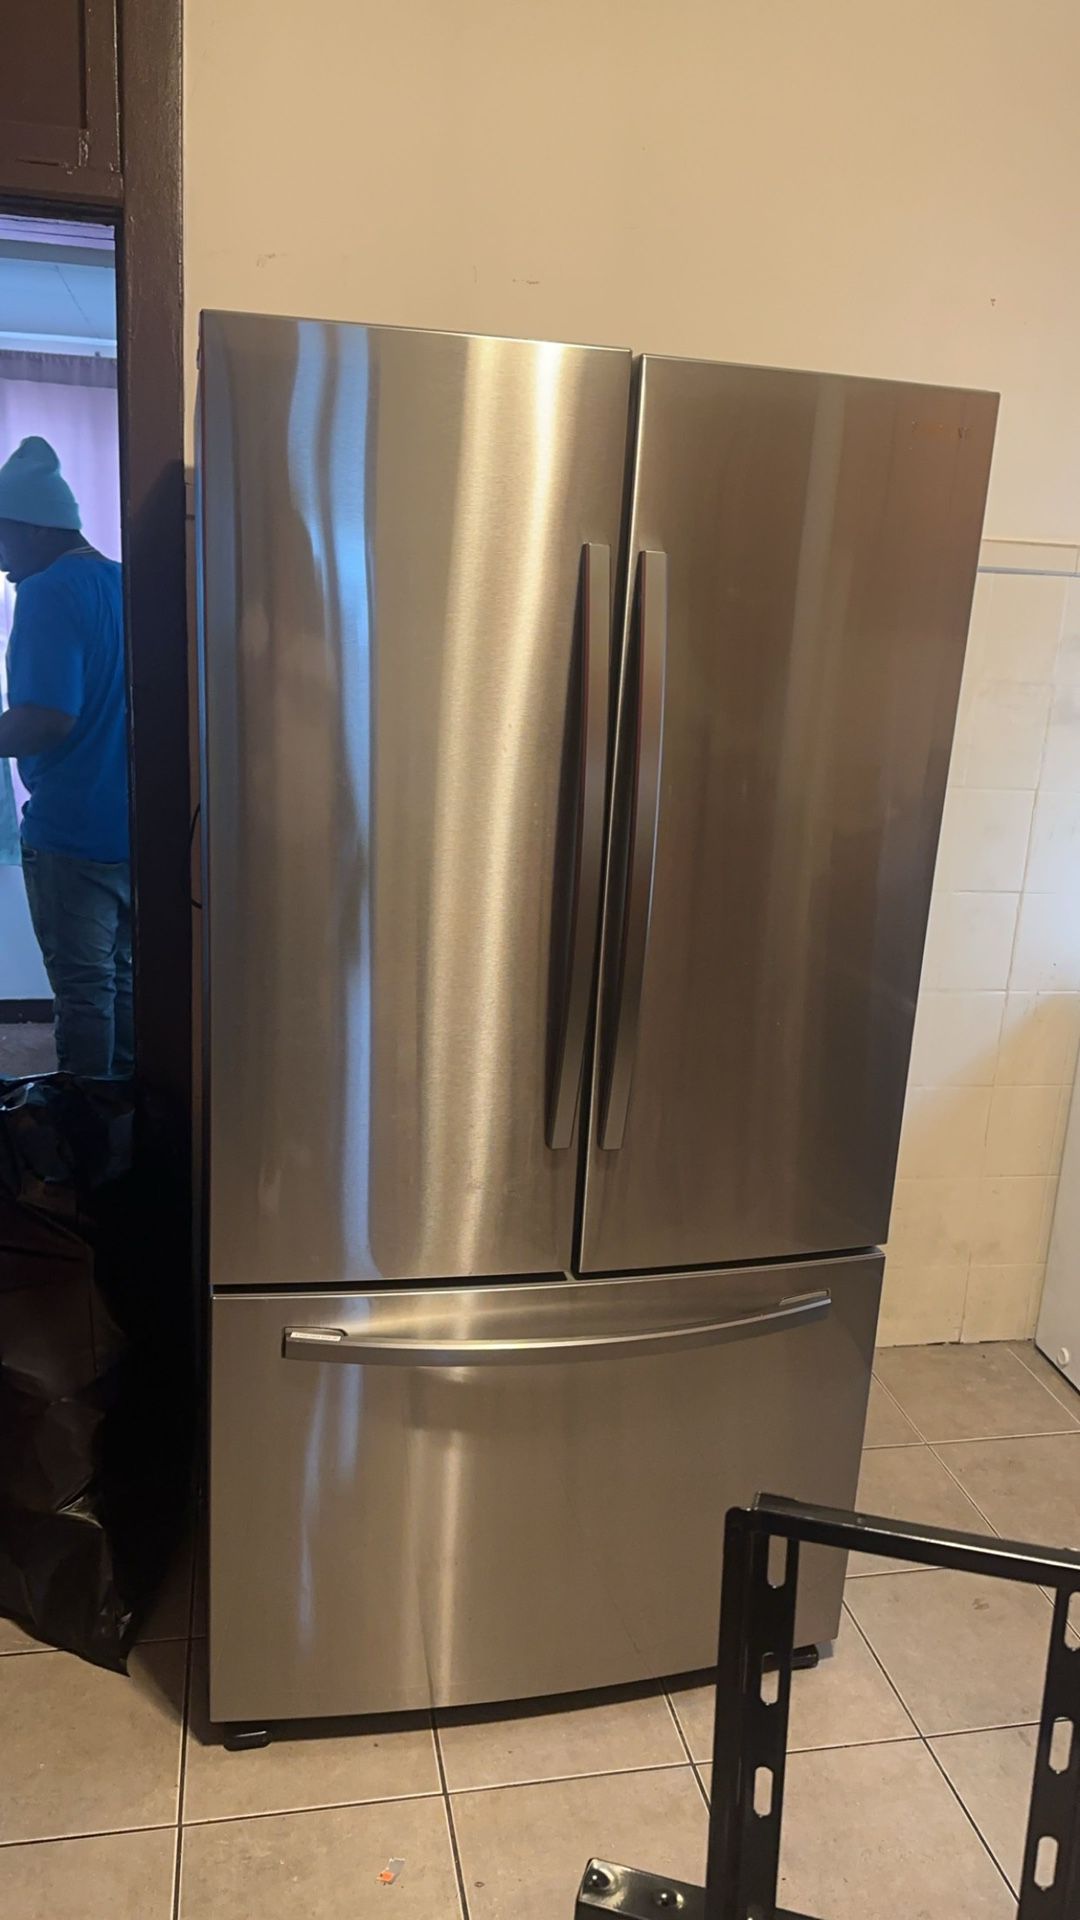 New Refrigerator For Sale